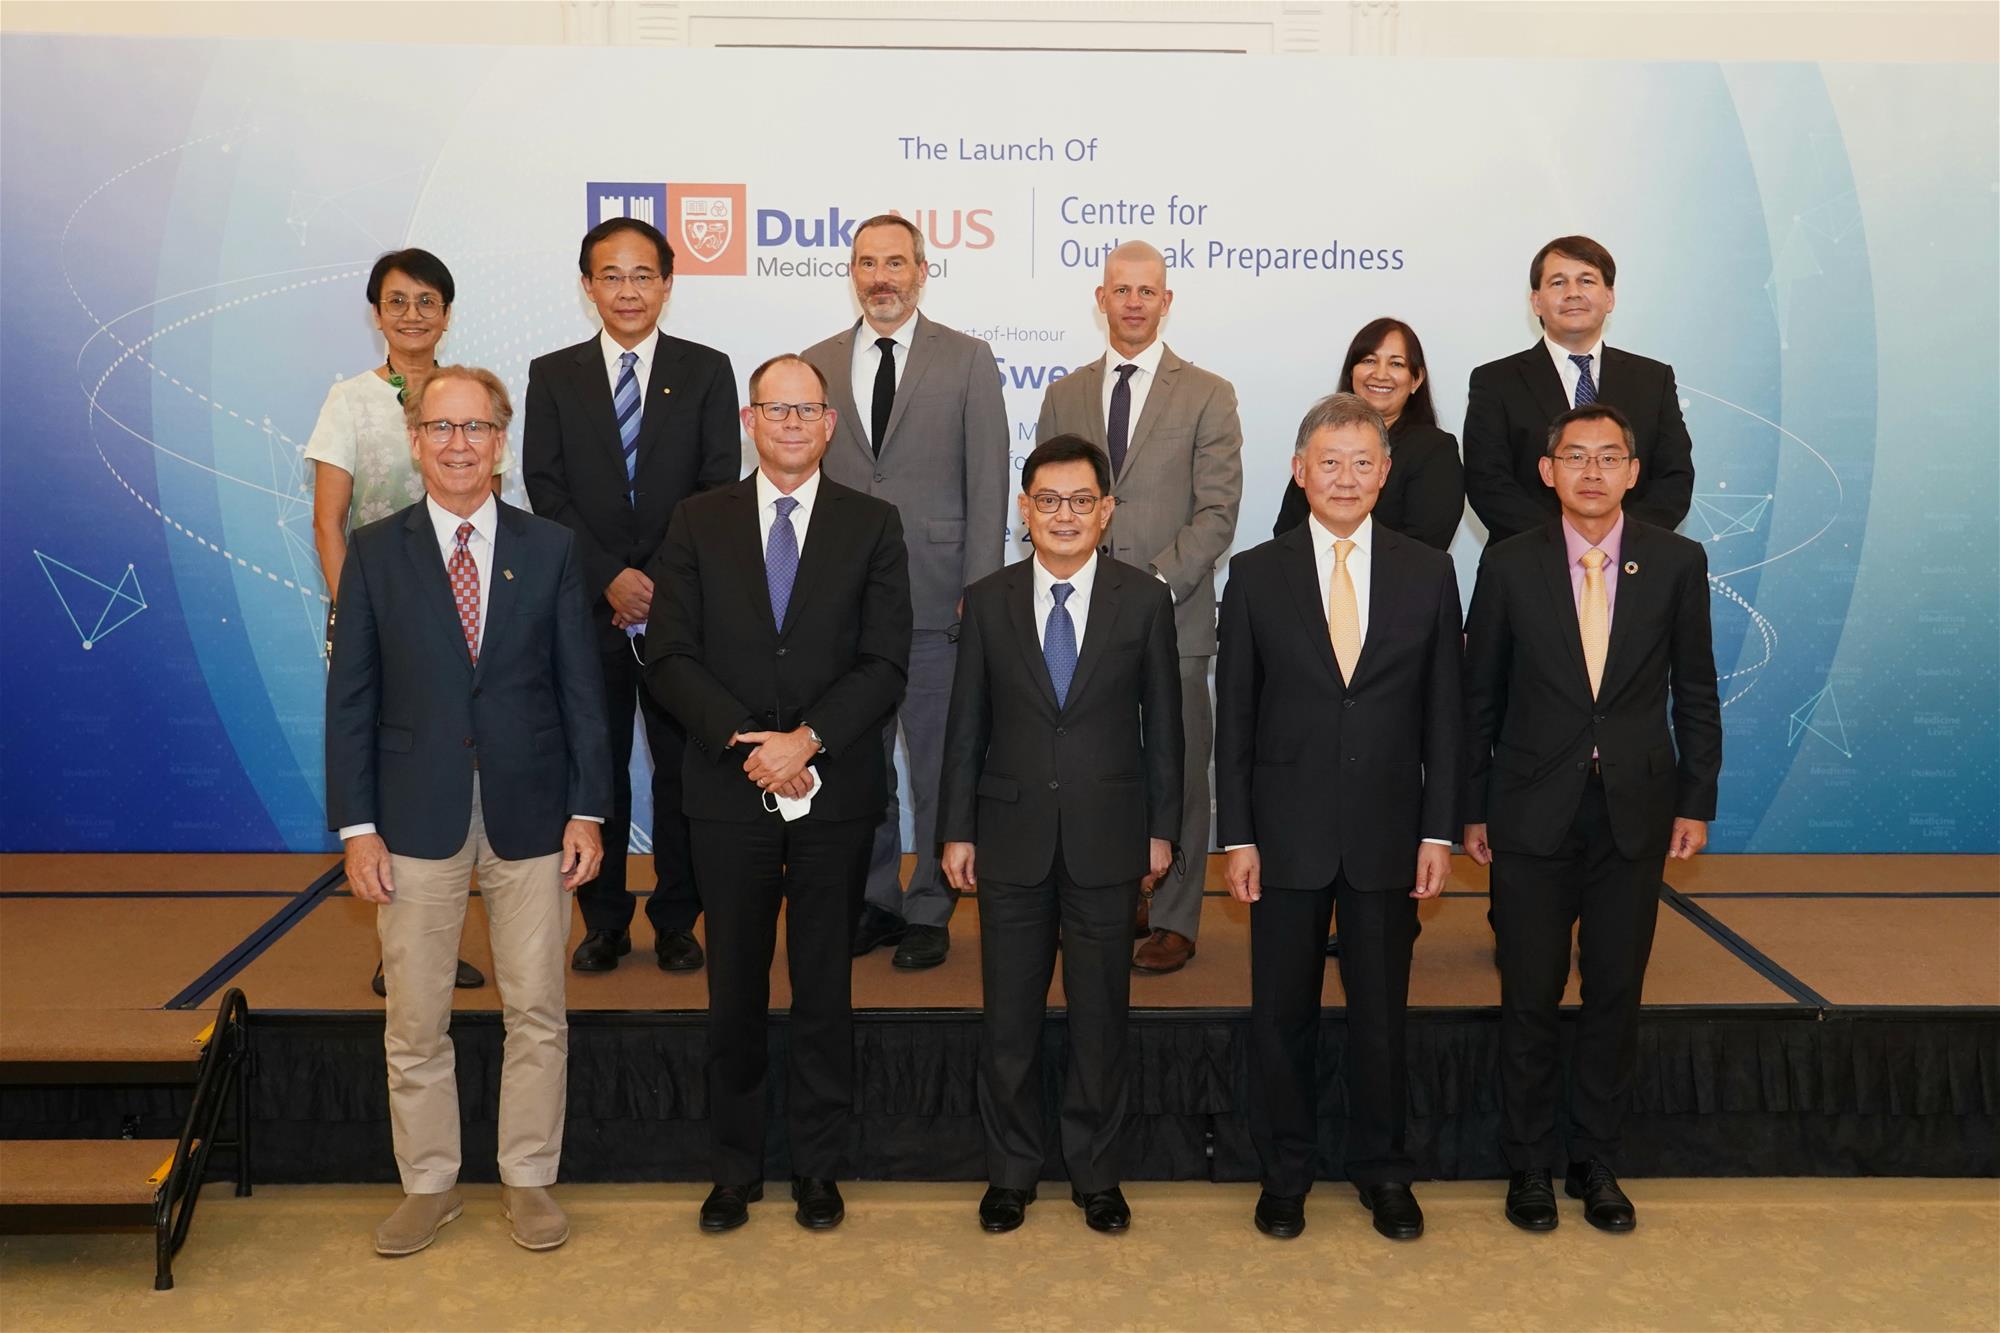 The launch of Duke-NUS' Centre for Pandemic Preparedness was attended by Mr Heng Swee Keat (front row centre)